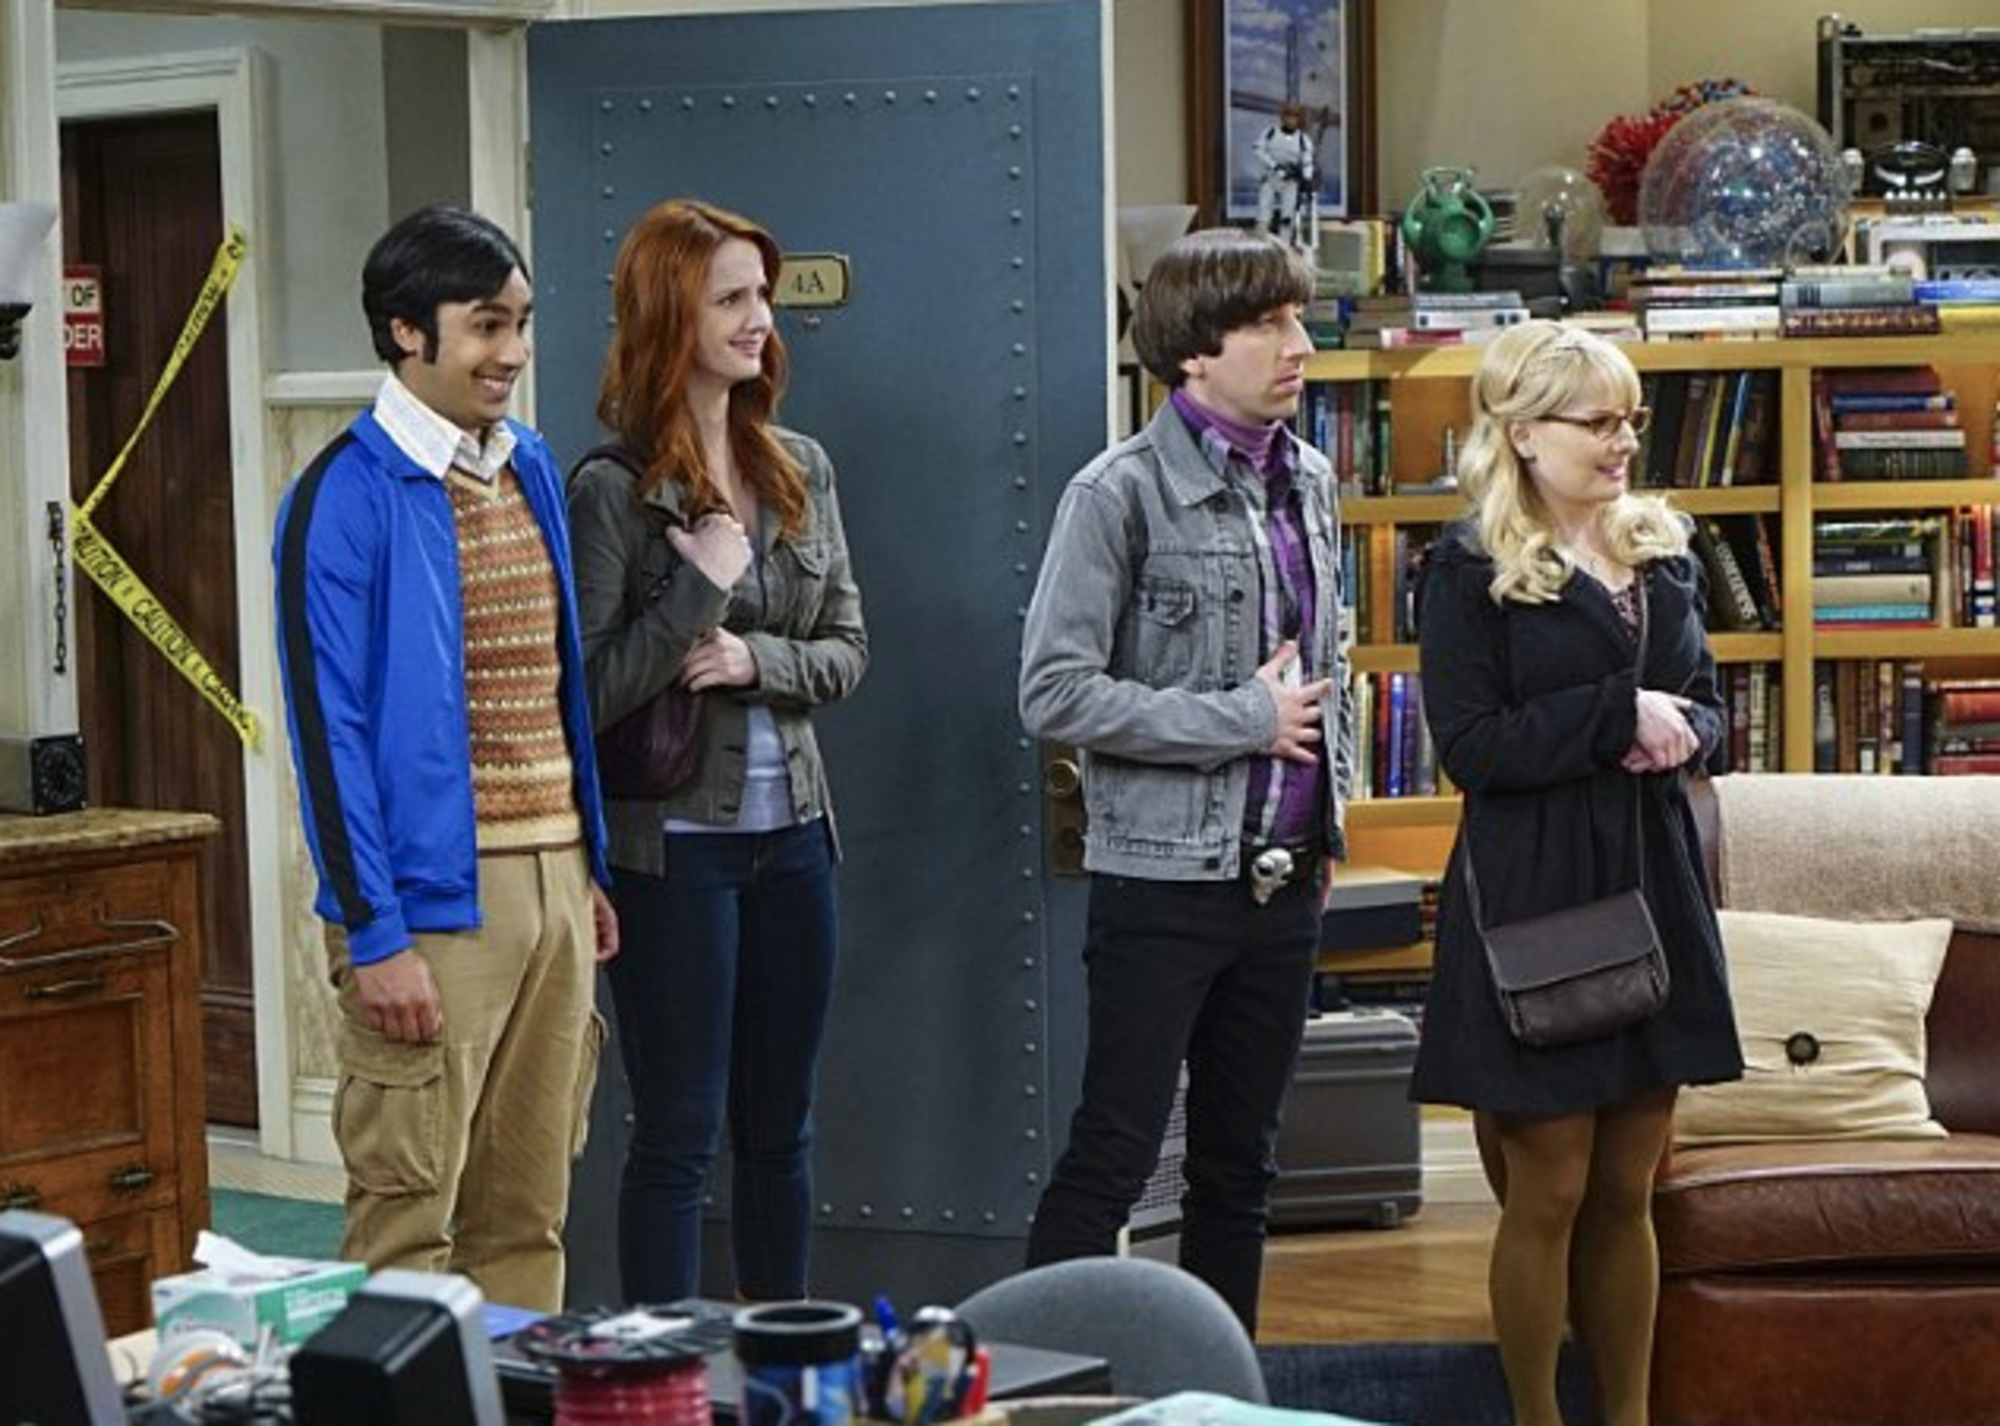 The Big Bang Theory Season 9, Episode 9 Live Stream: Watch Online